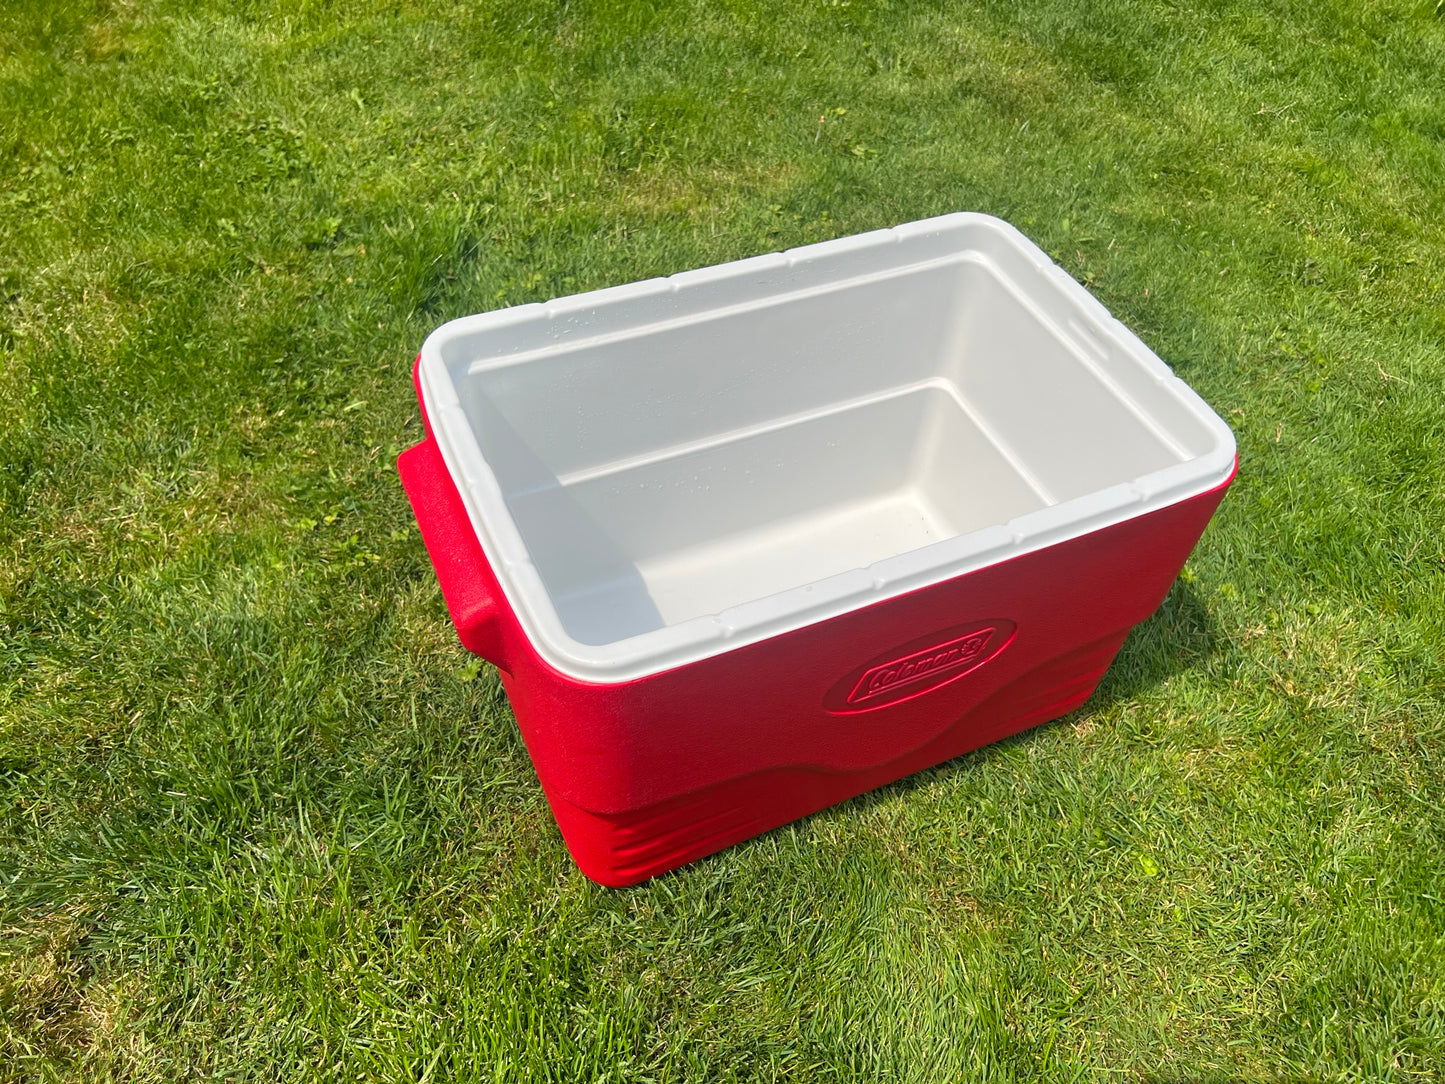 Camping Classic Coleman Red Cooler 36 Quart 4 Cup Holders Like New Fishing Beach Picnic Like New